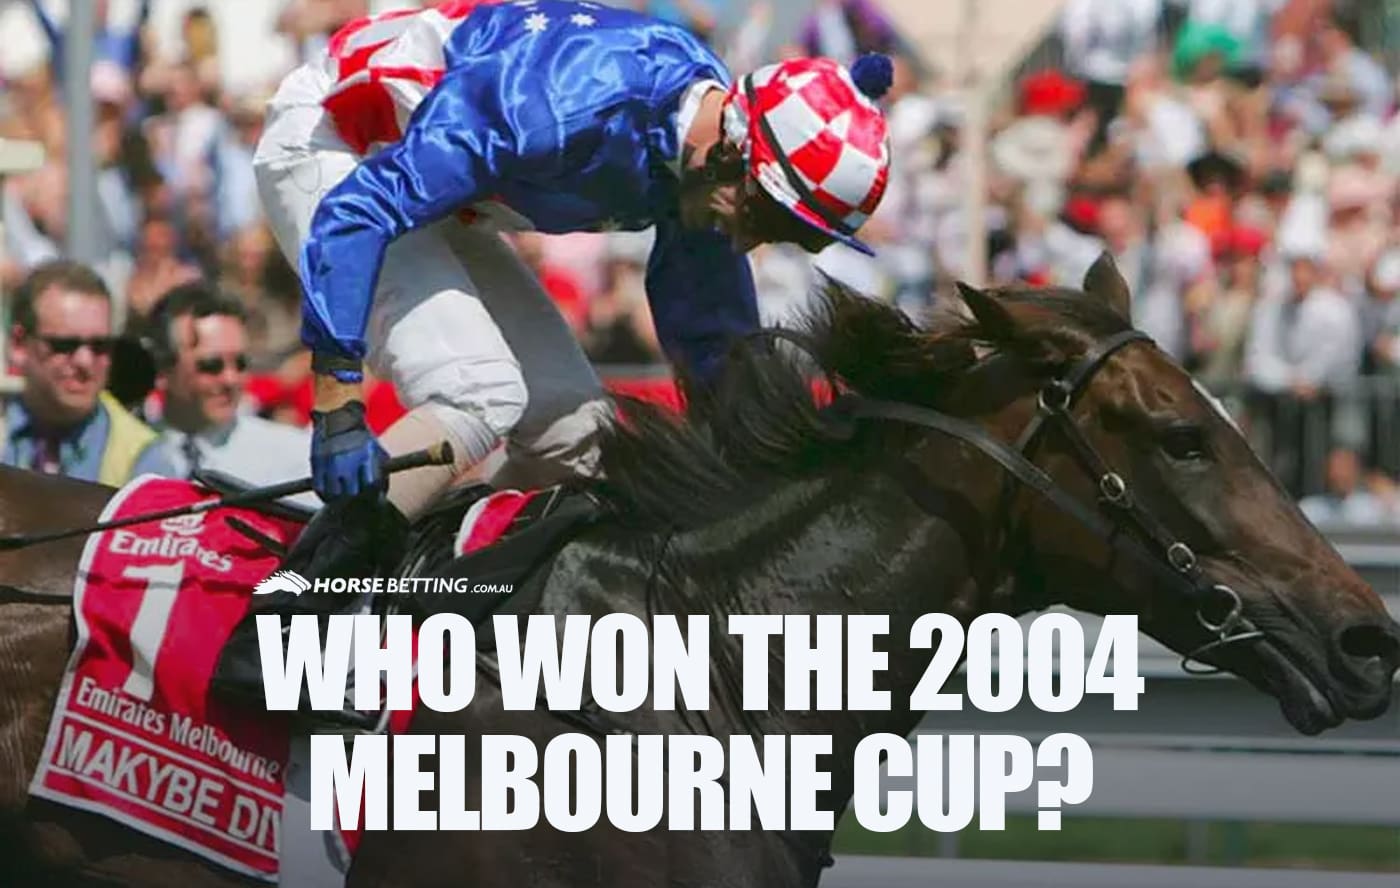 Who won the 2004 Melbourne Cup?